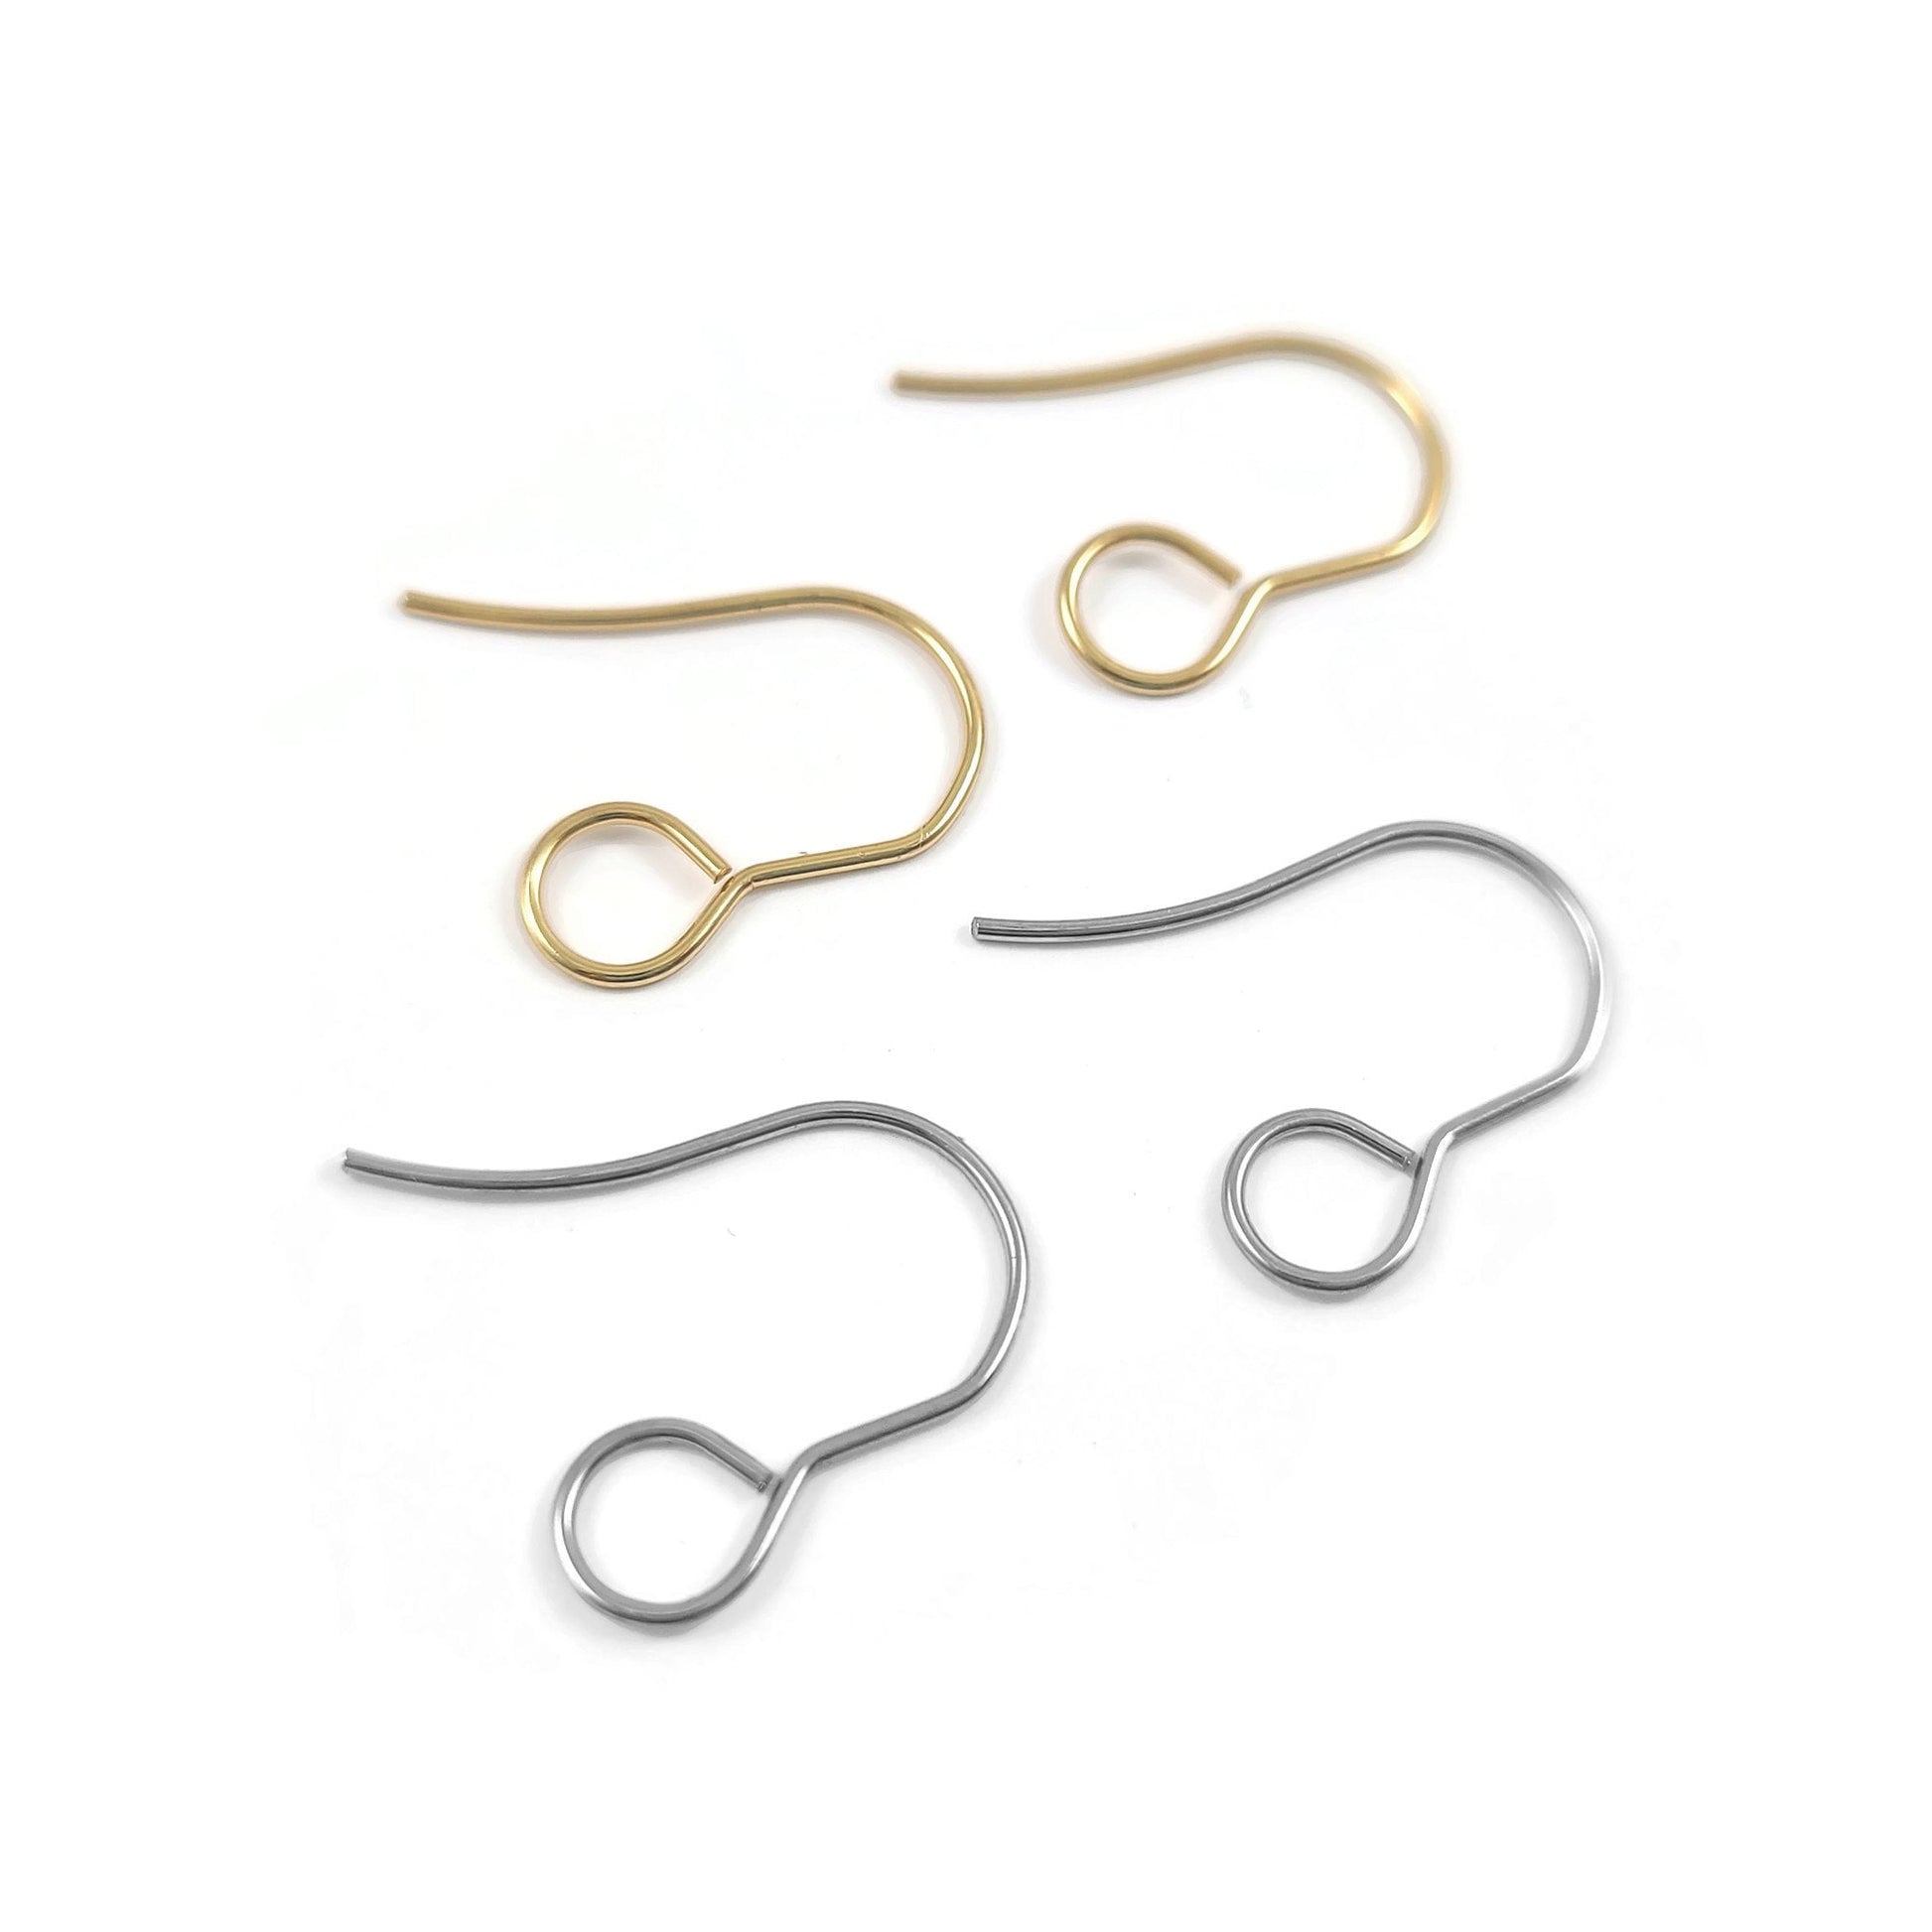 20 big hole loop ear wire, Hypoallergenic surgical stainless steel